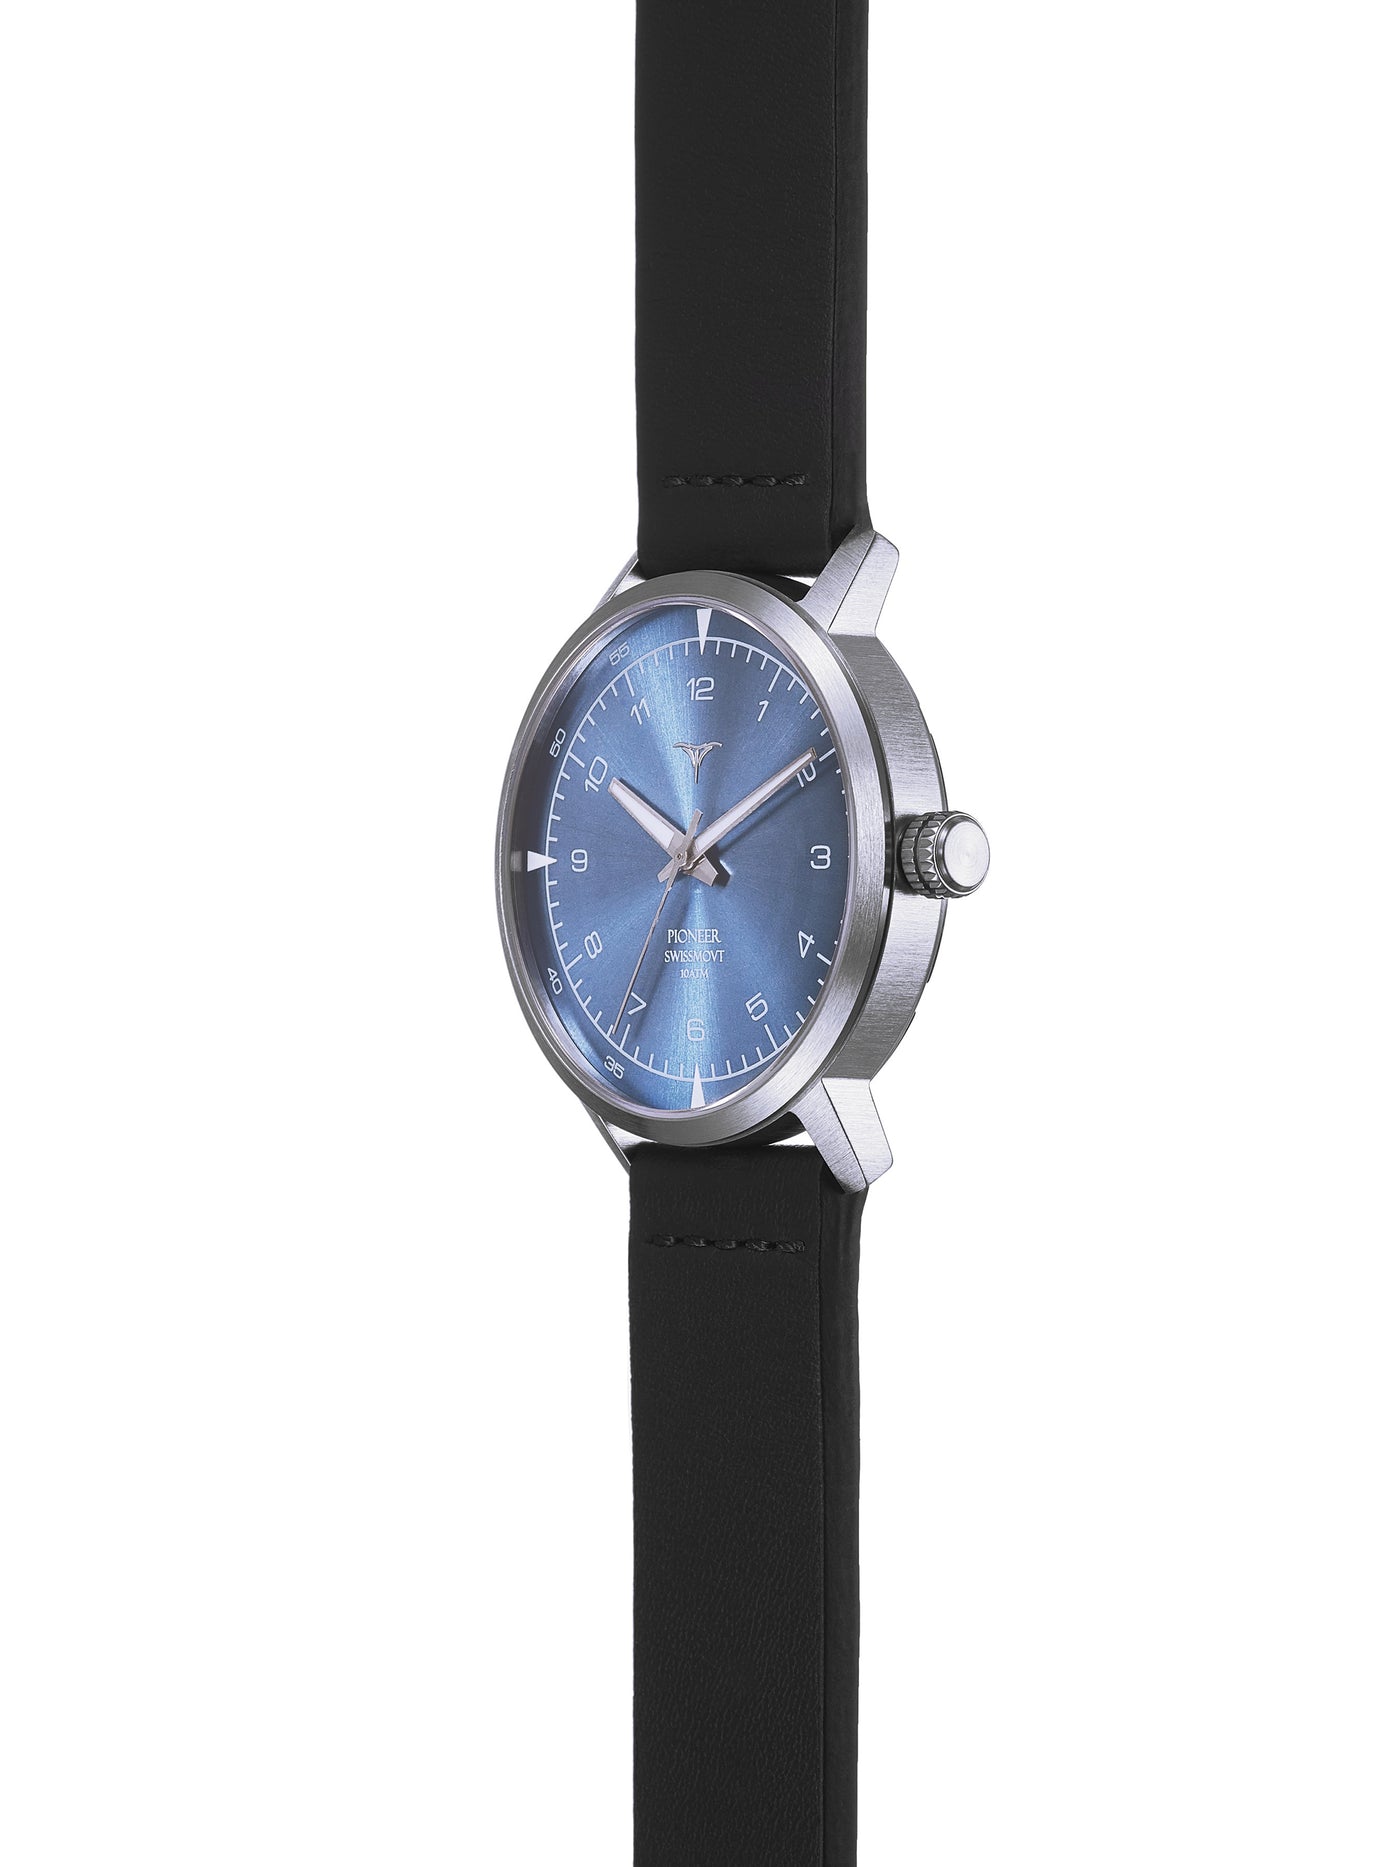 Sunray Blue dial Swiss Made quartz watches V-Pioneer with Black Horween Leather Straps | Vstelle Watch